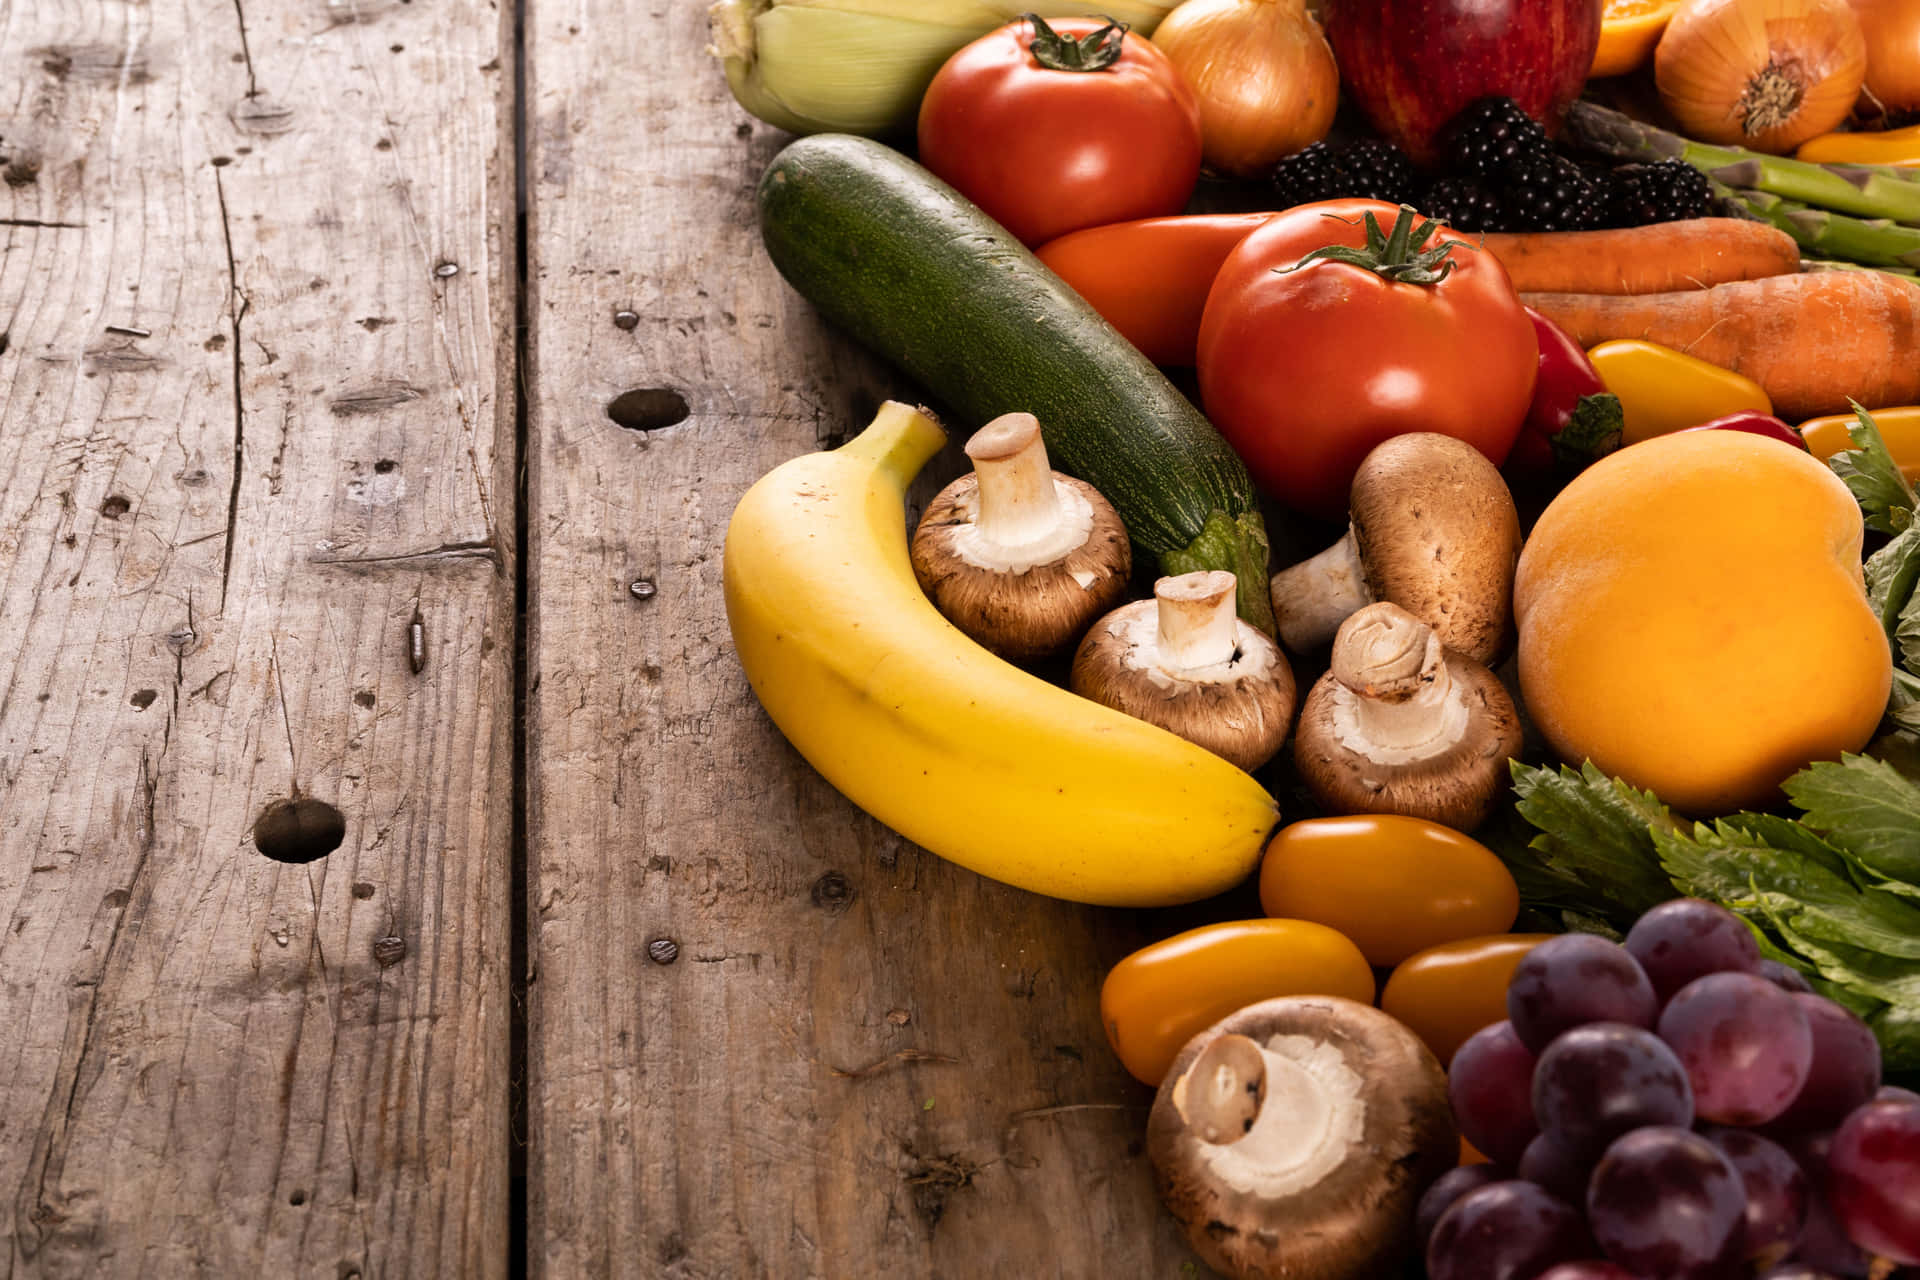 Fruits And Vegetables On A Wooden Surface Wallpaper